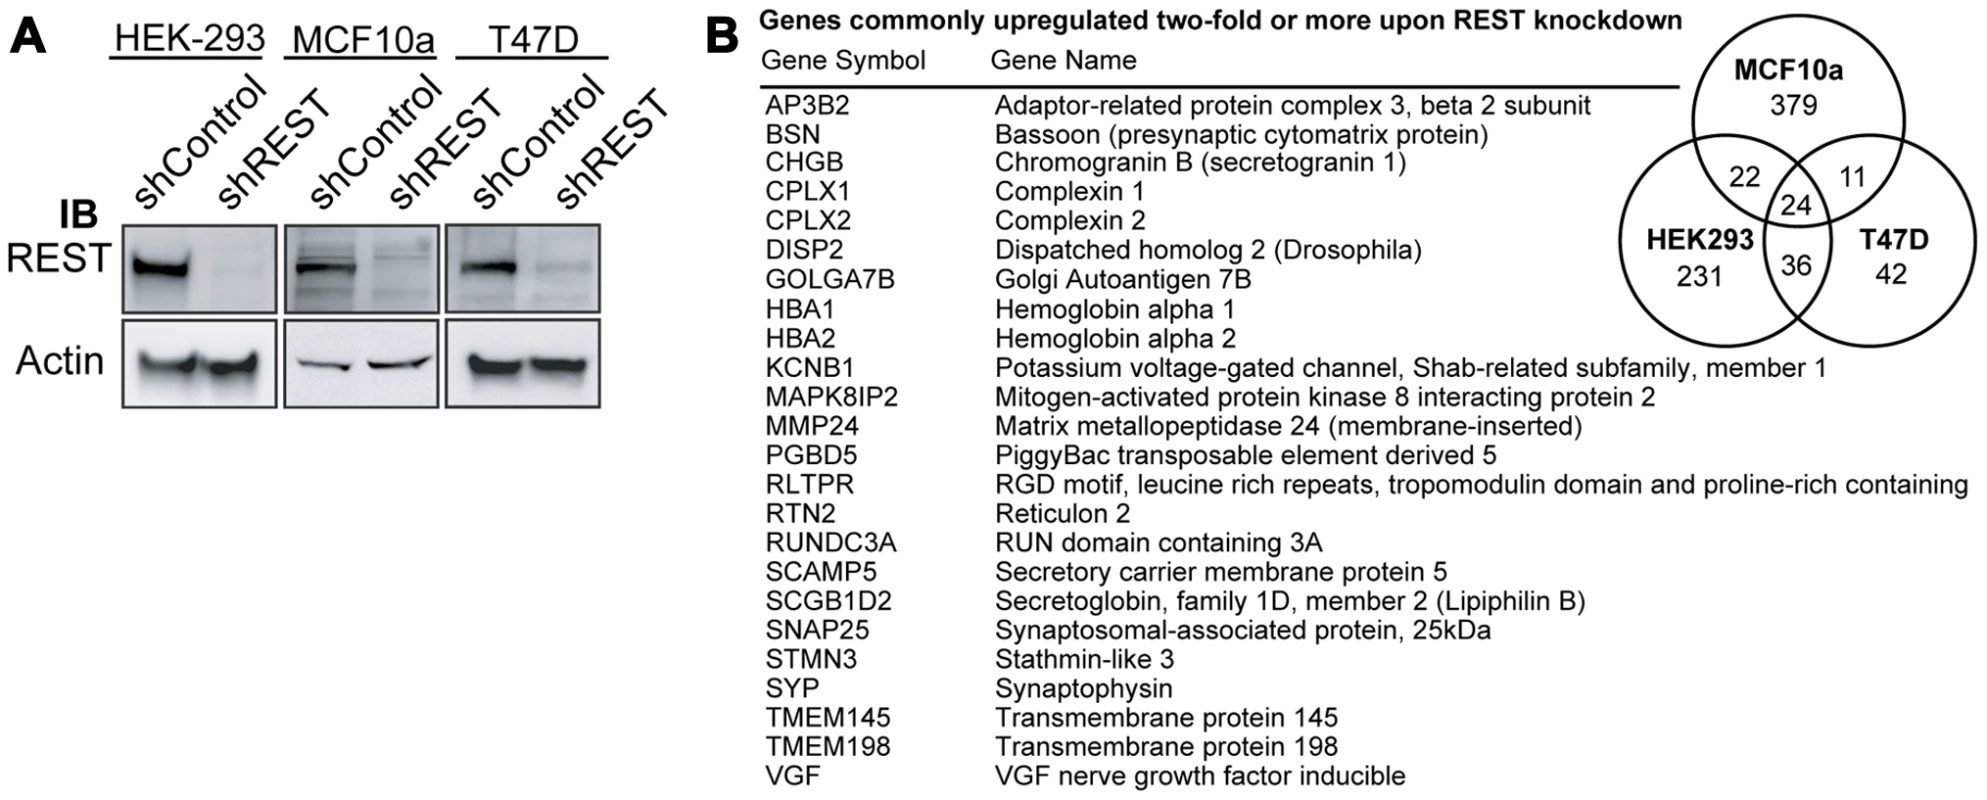 Generation of a 24-gene signature for loss of REST.